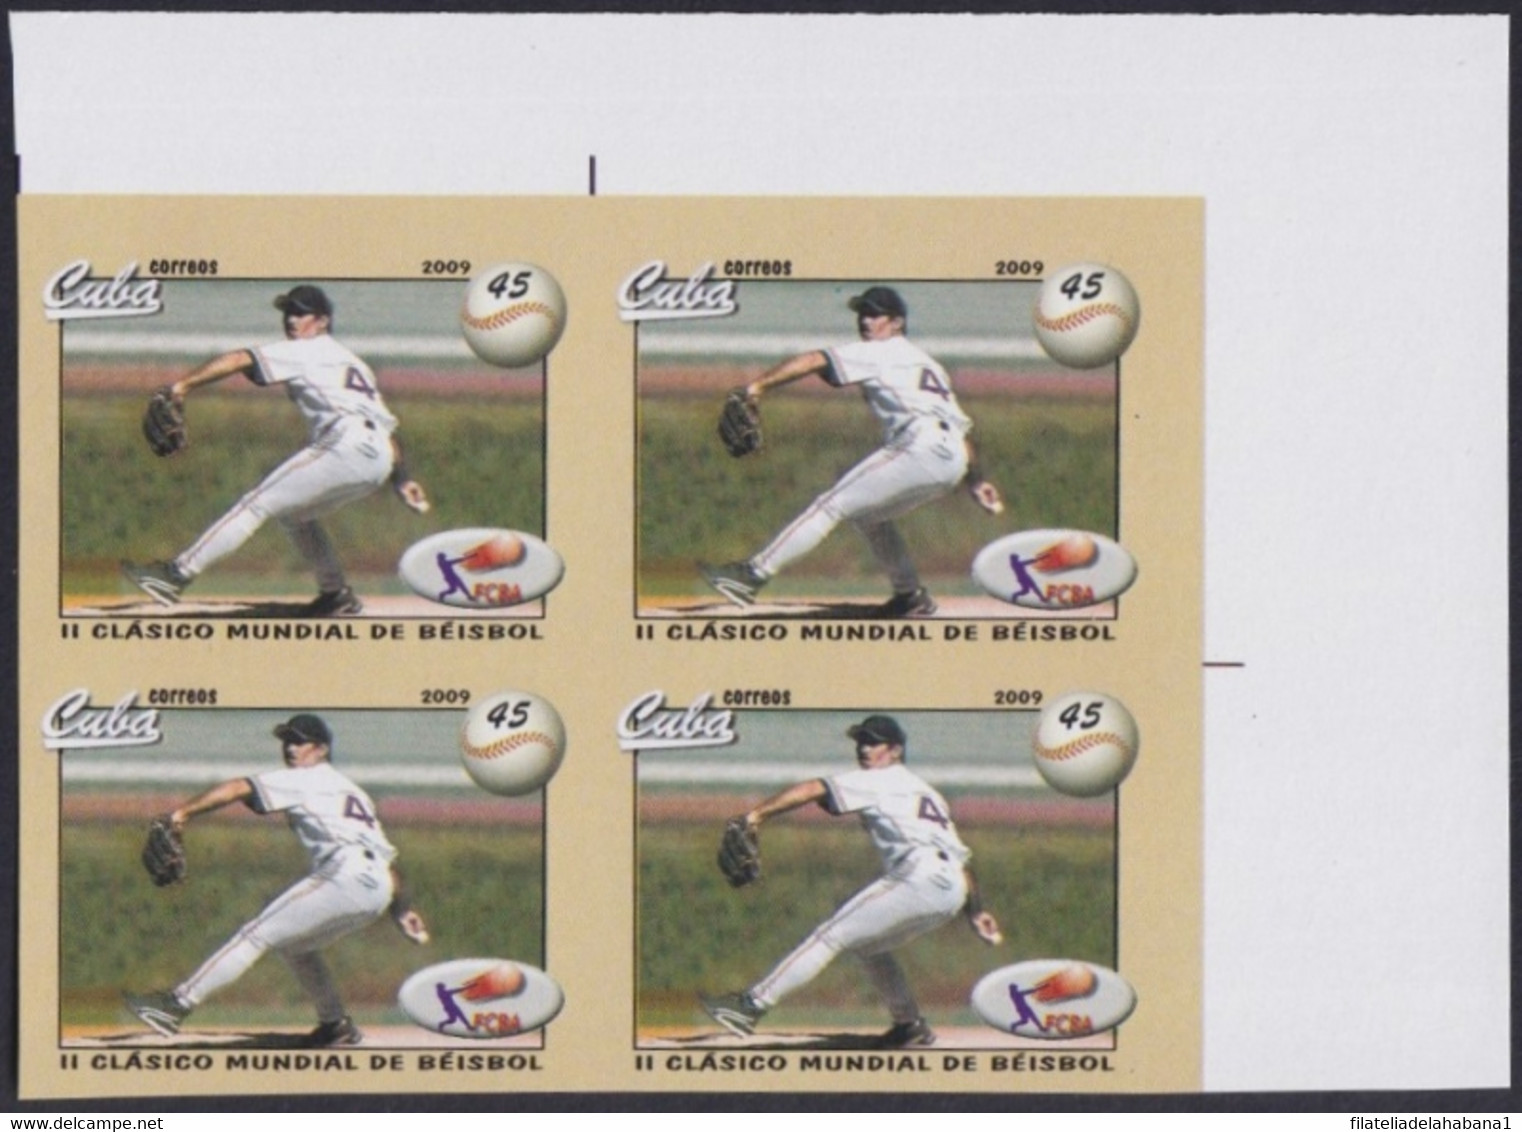 2009.452 CUBA 2009 45c MNH IMPERFORATED PROOF BASEBALL CLASSIC GAMES. - Imperforates, Proofs & Errors